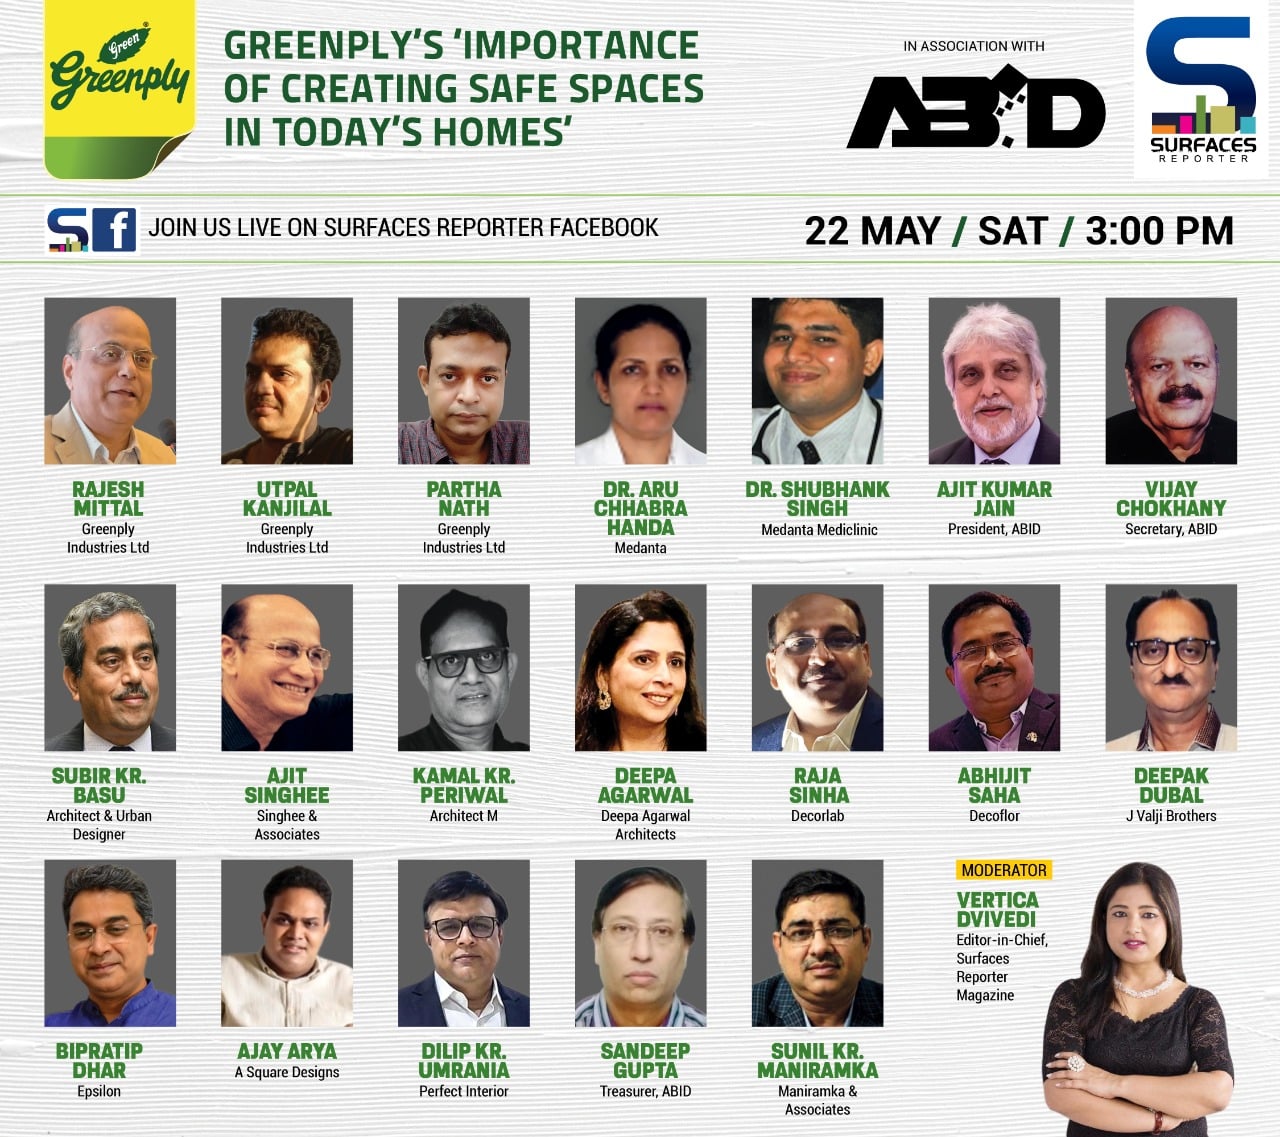 Greenply session on "IMPORTANCE OF CREATING SAFE SPACES IN TODAYs HOMES" in association with ABID Kolkata, telecasted & moderated by SURFACES REPORTER!